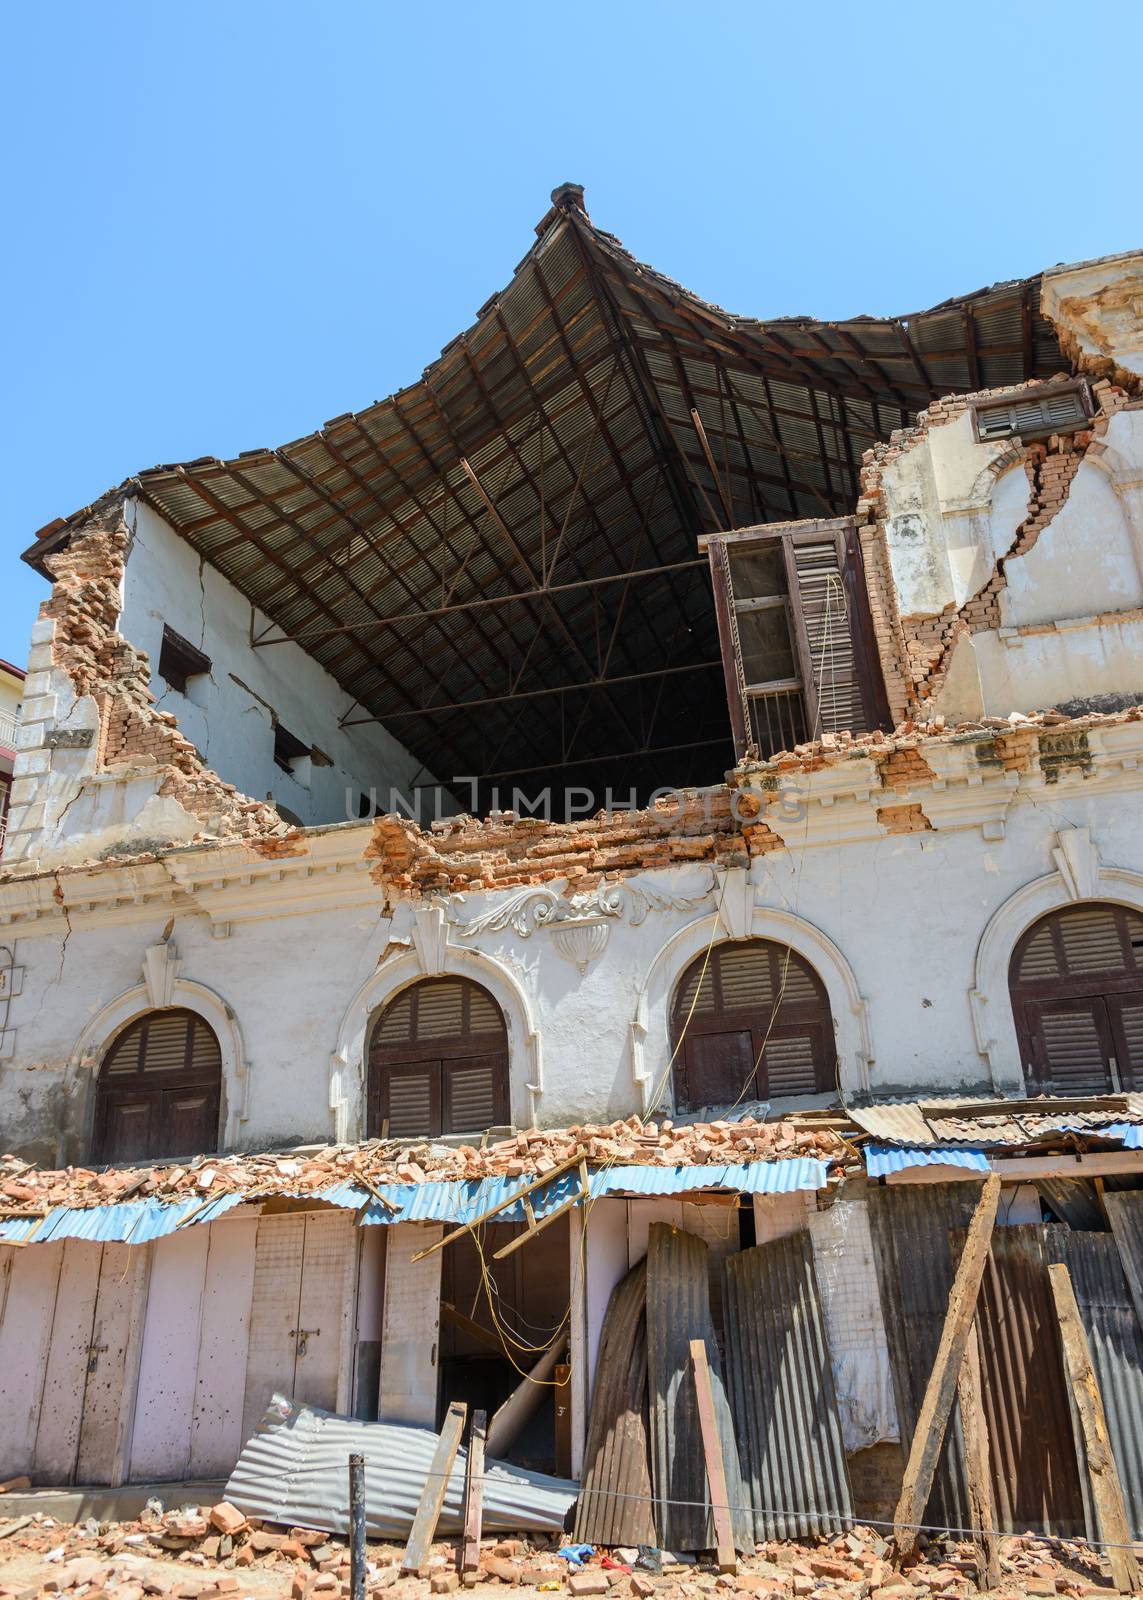 KATHMANDU, NEPAL - MAY 14, 2015: A damaged building after two major earthquakes hit Nepal in the past weeks.